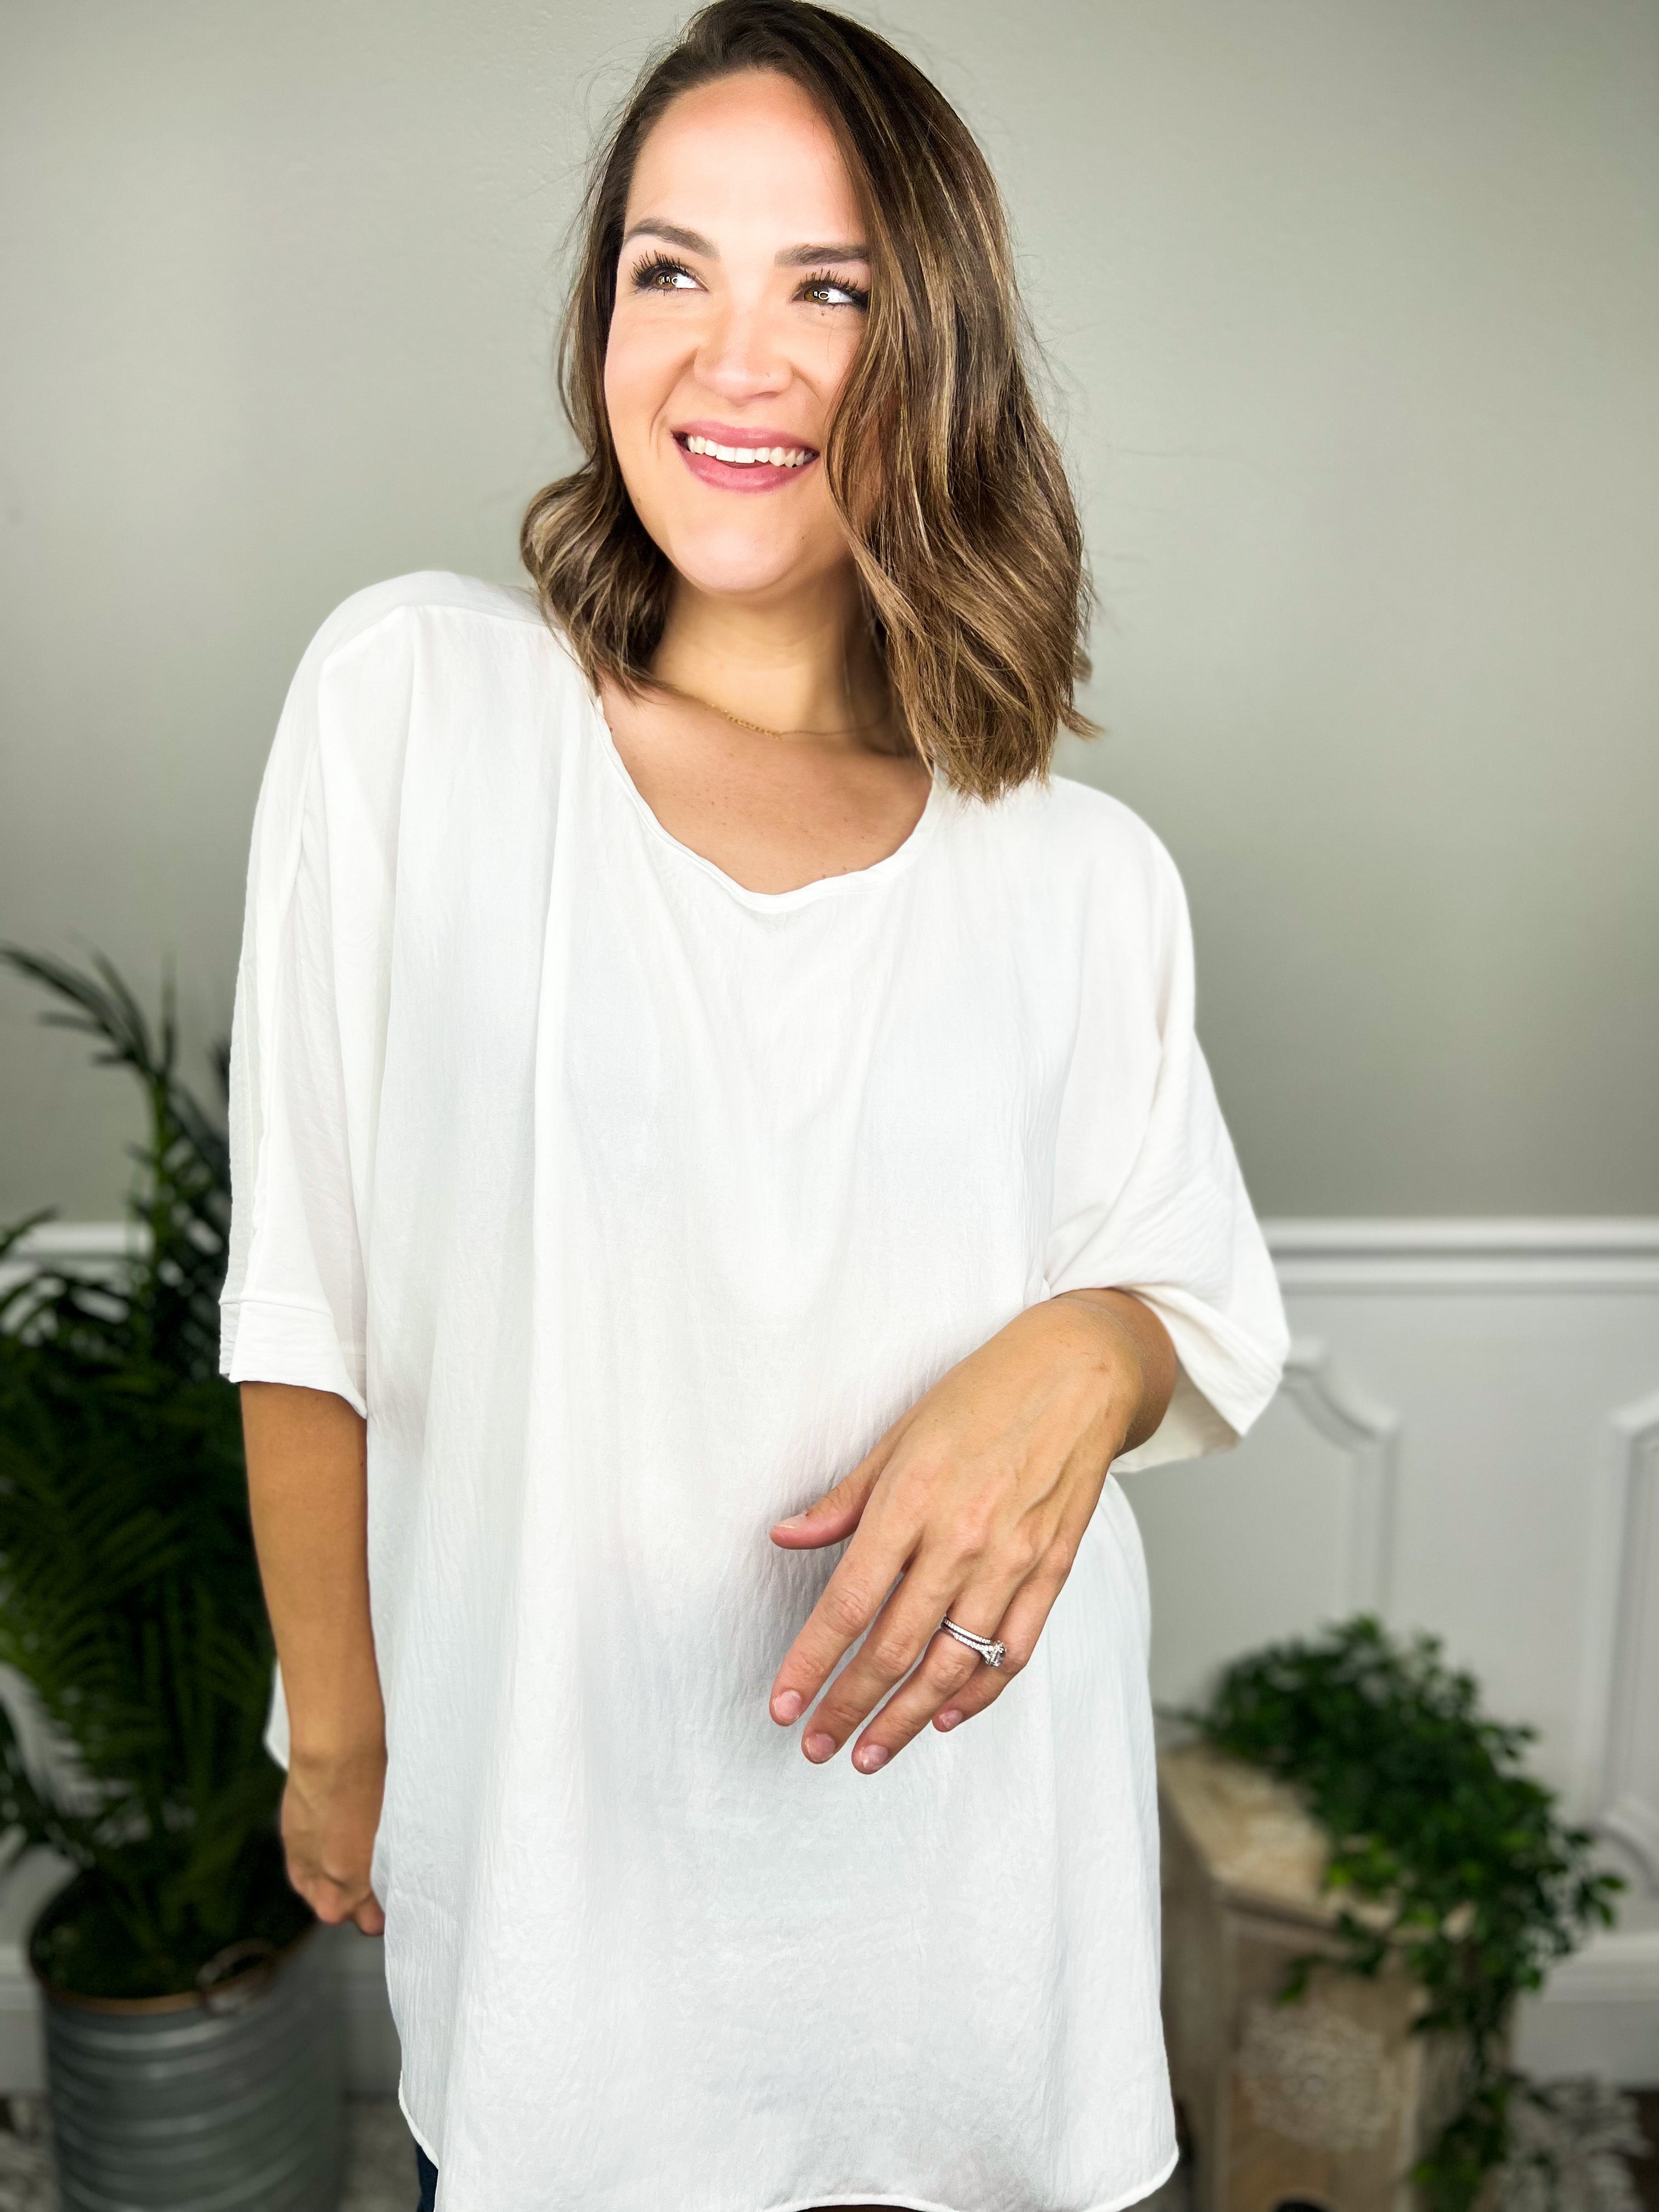 RESTOCK : Fresh New Look Top-110 Short Sleeve Top-First Love-Heathered Boho Boutique, Women's Fashion and Accessories in Palmetto, FL